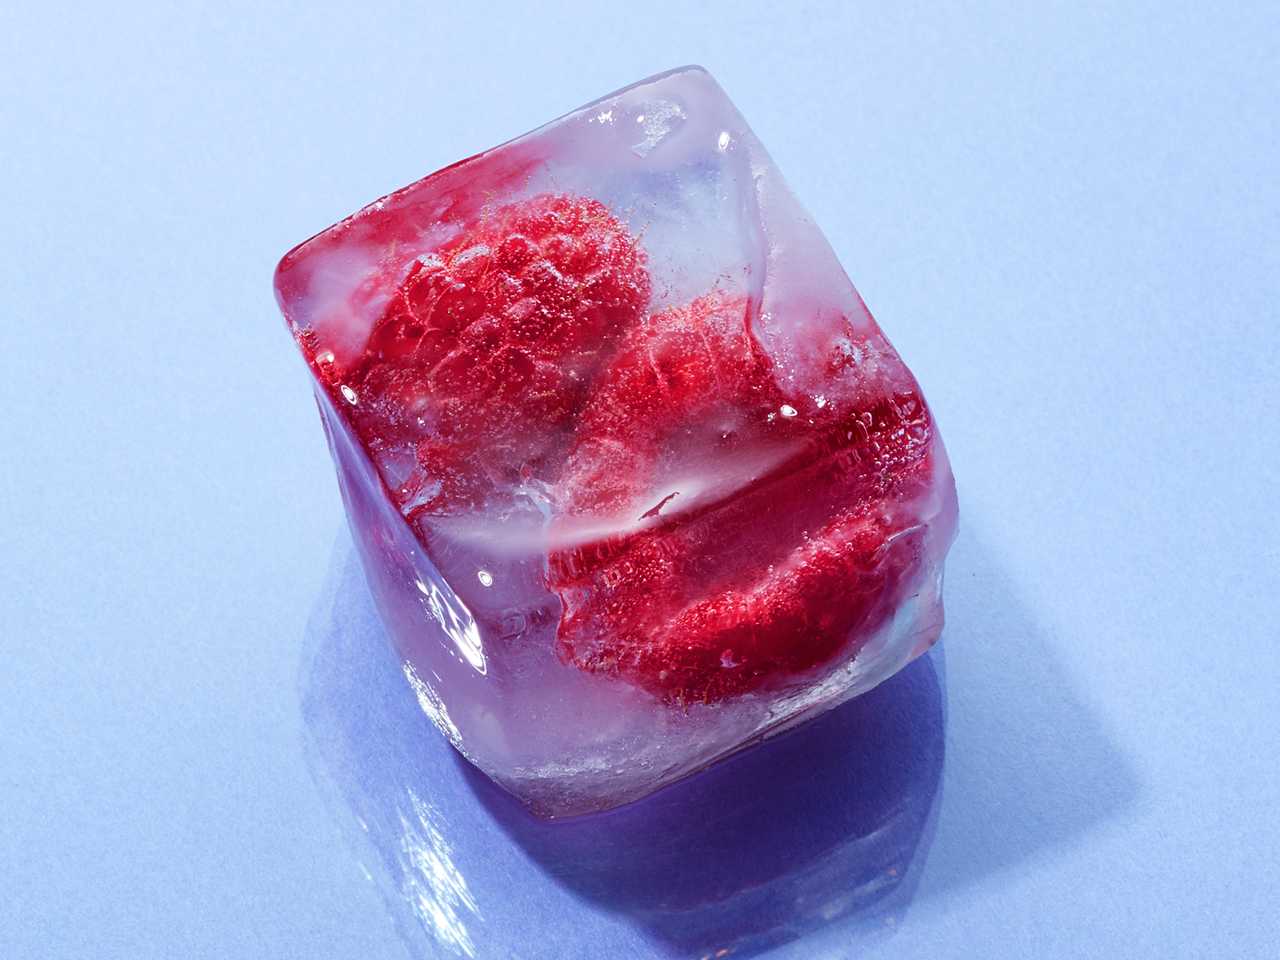 ice cube with raspberries inside